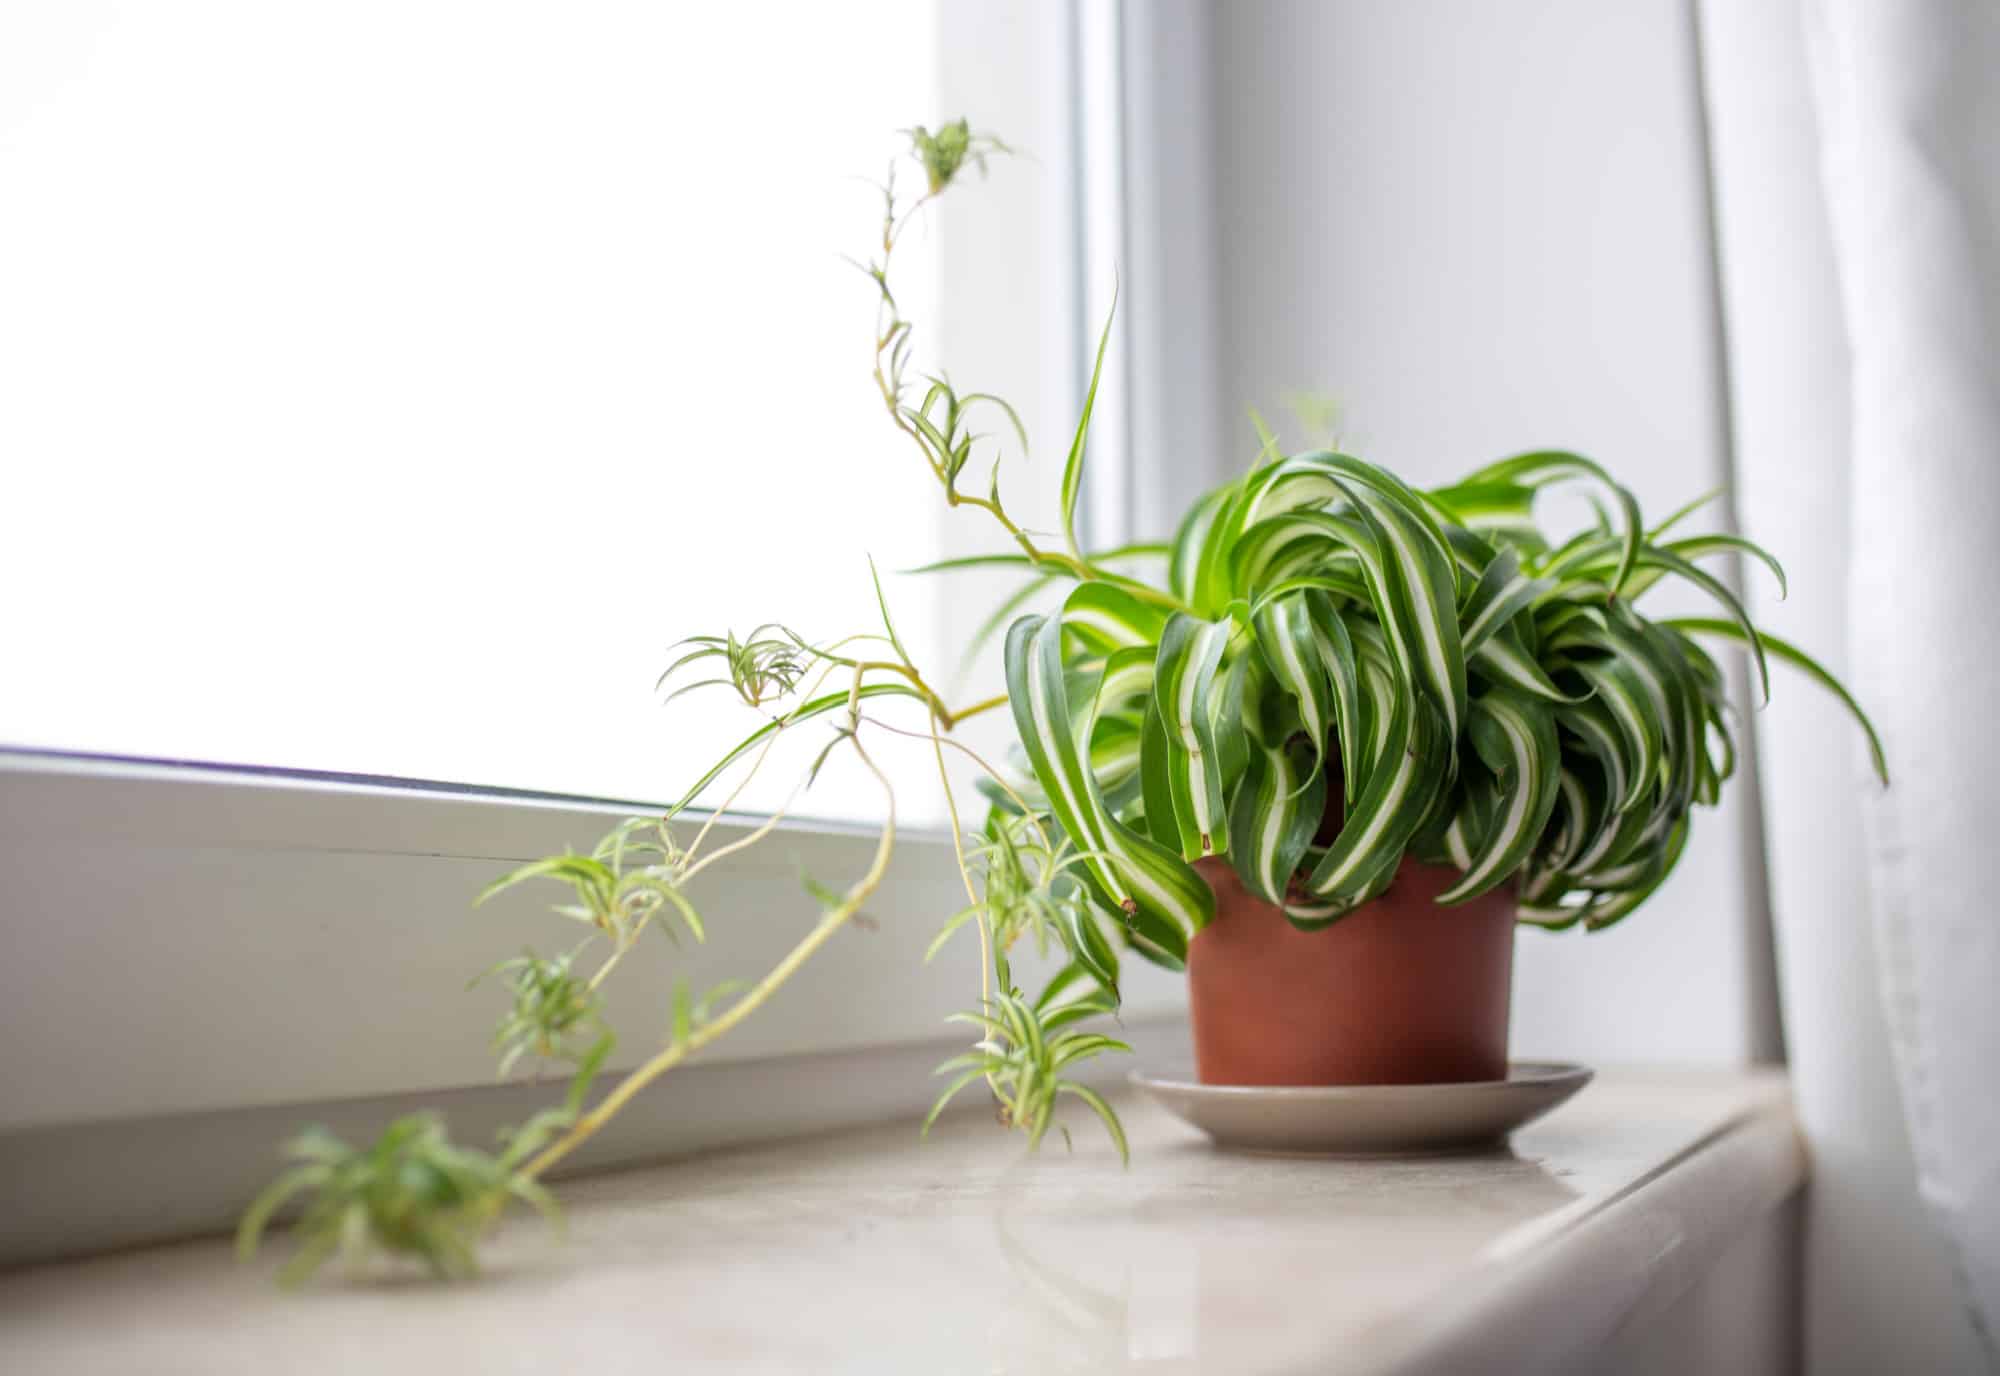 How to Care for Your Spider Plant and Get Maximum Growth